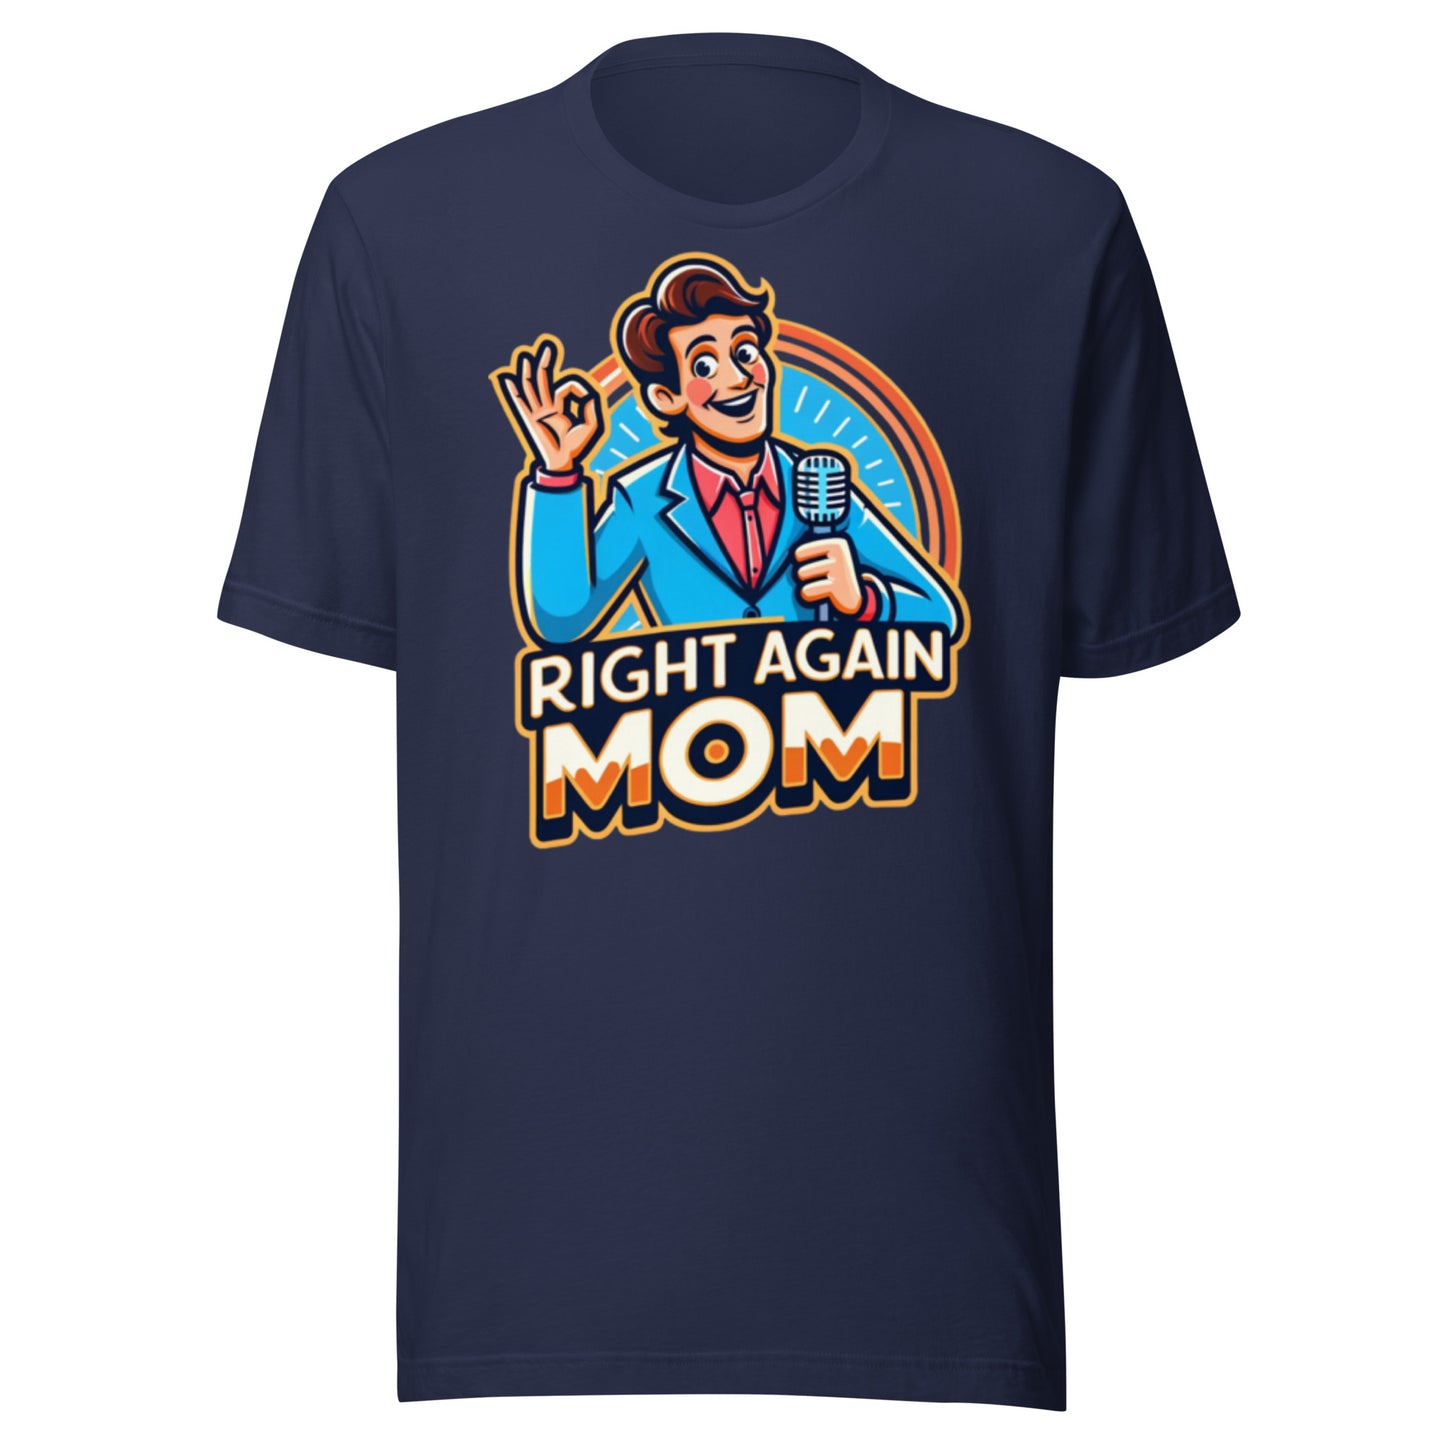 "Right Again Mom" The Ultimate T-Shirt for the Know-It-All in You - Unisex t-shirt